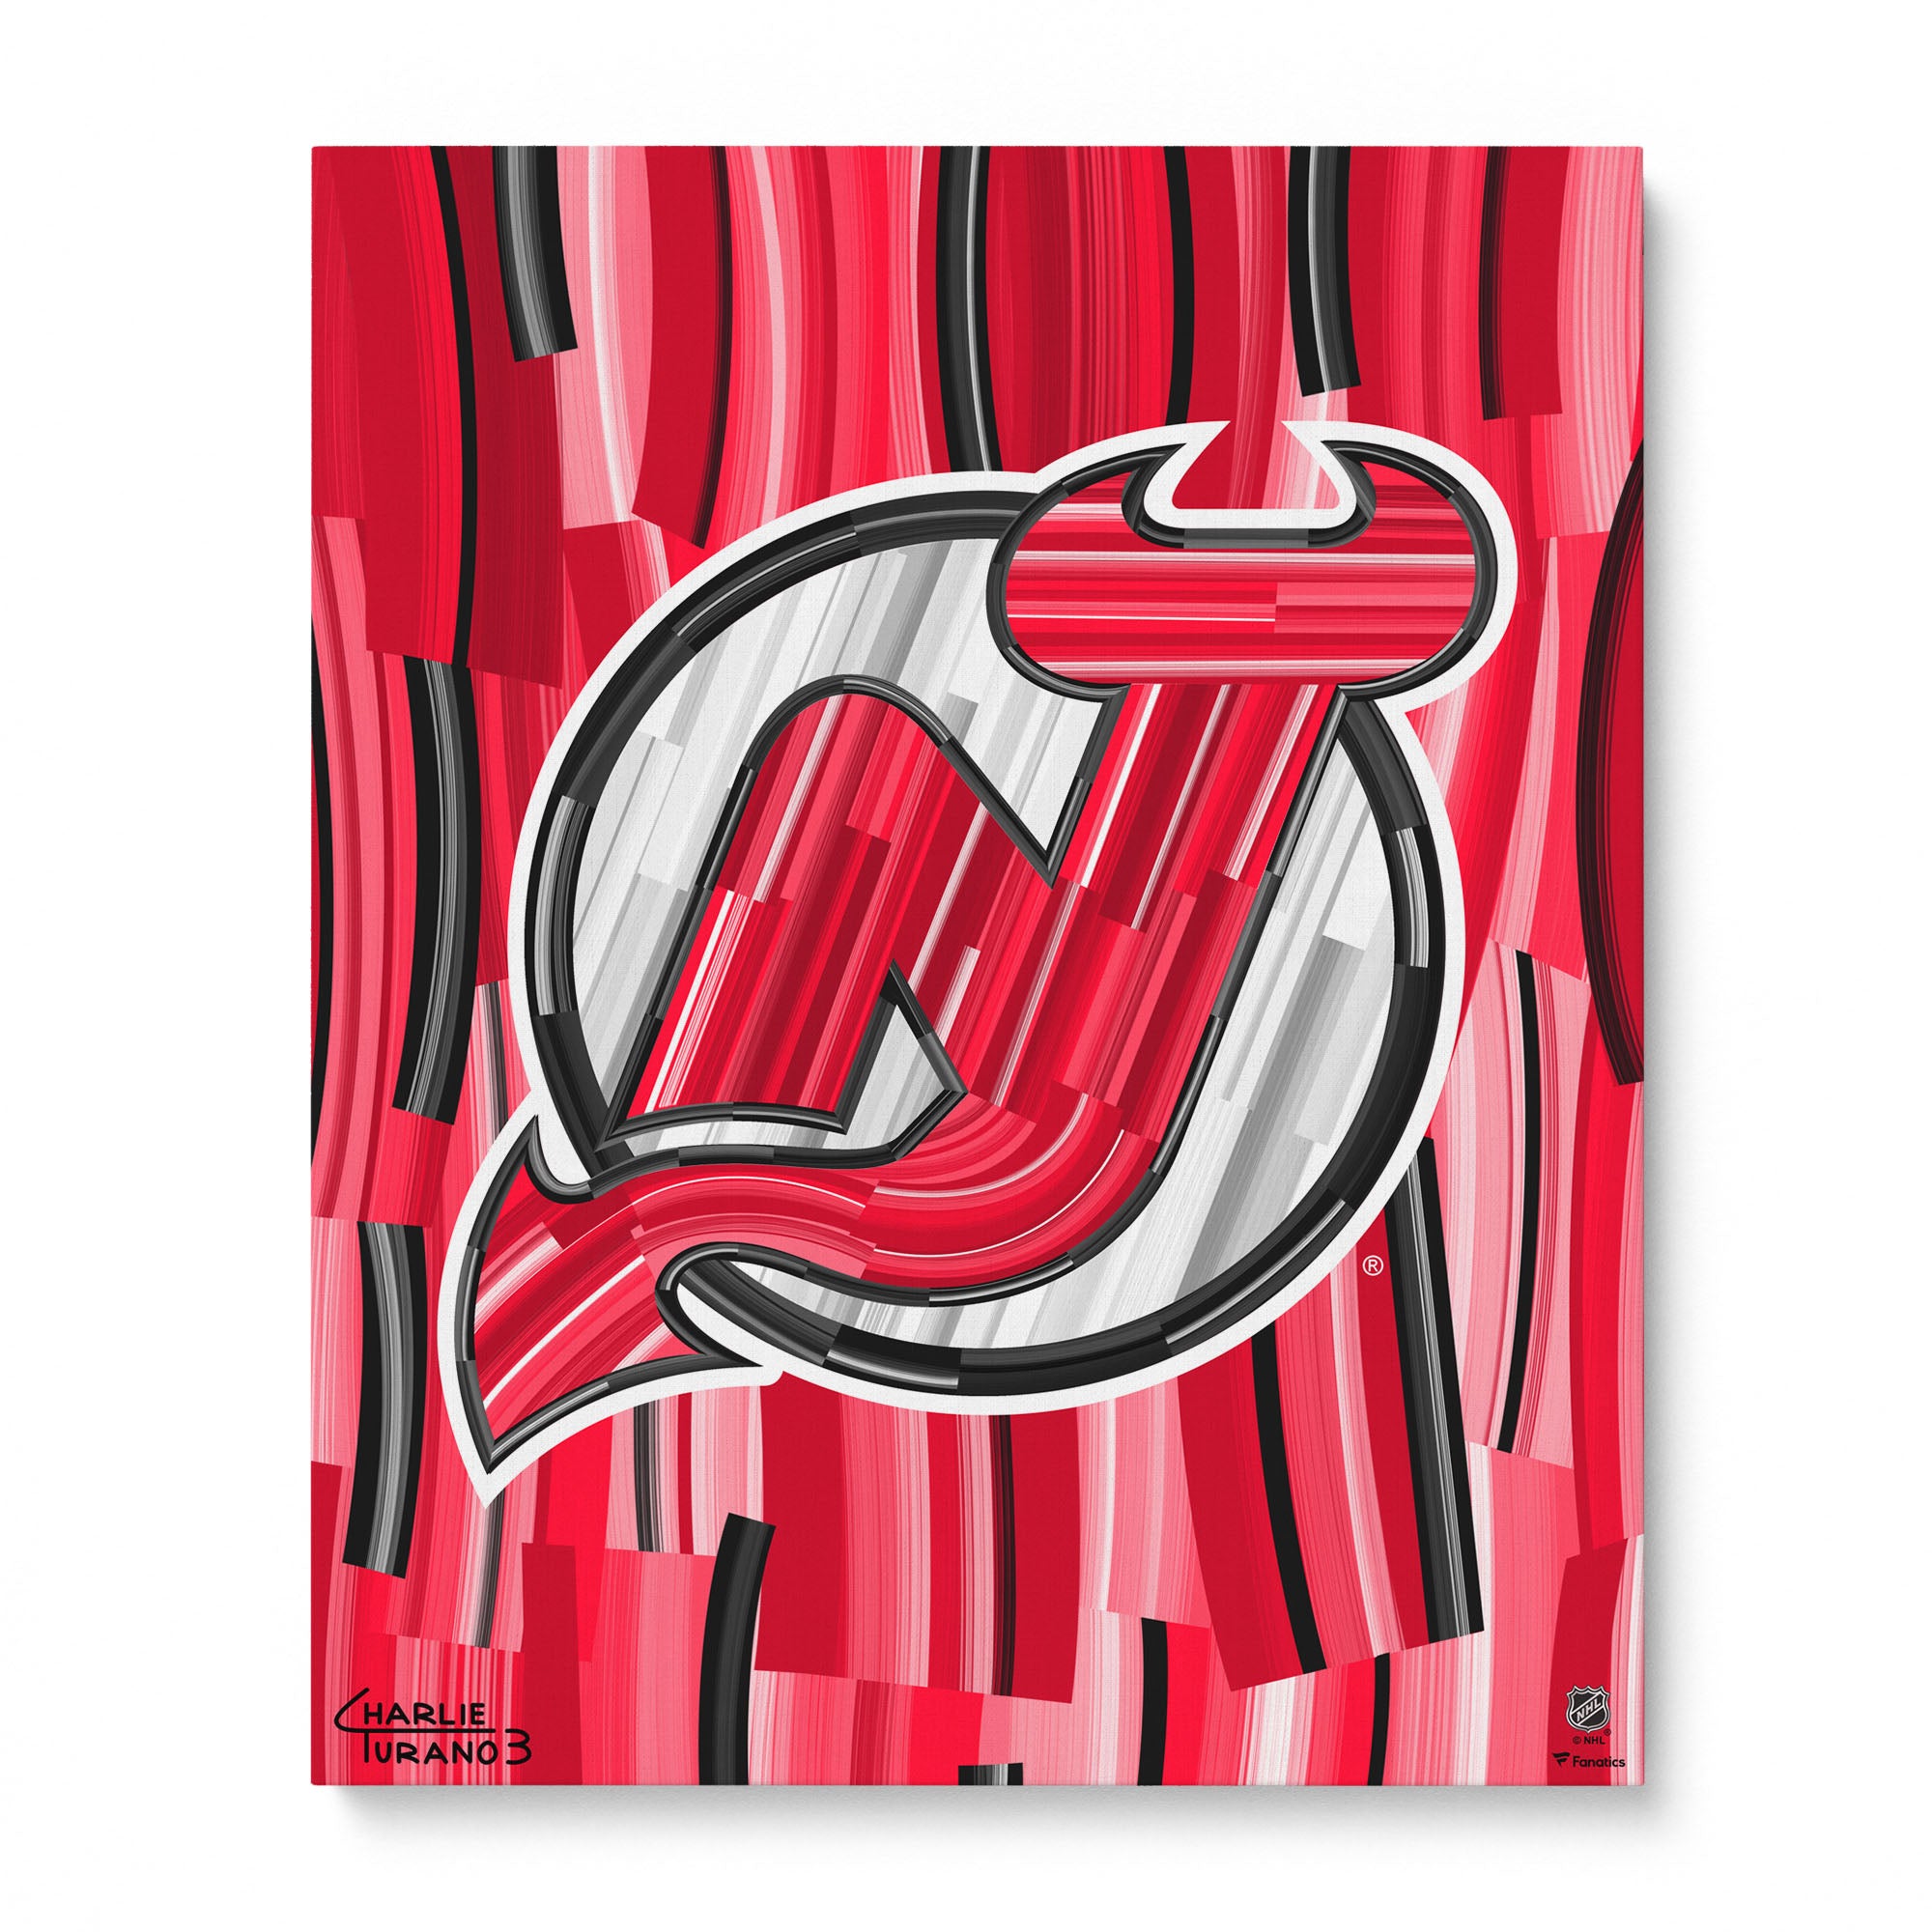 New Jersey Devils Wallpapers  New jersey devils, New jersey, Jersey